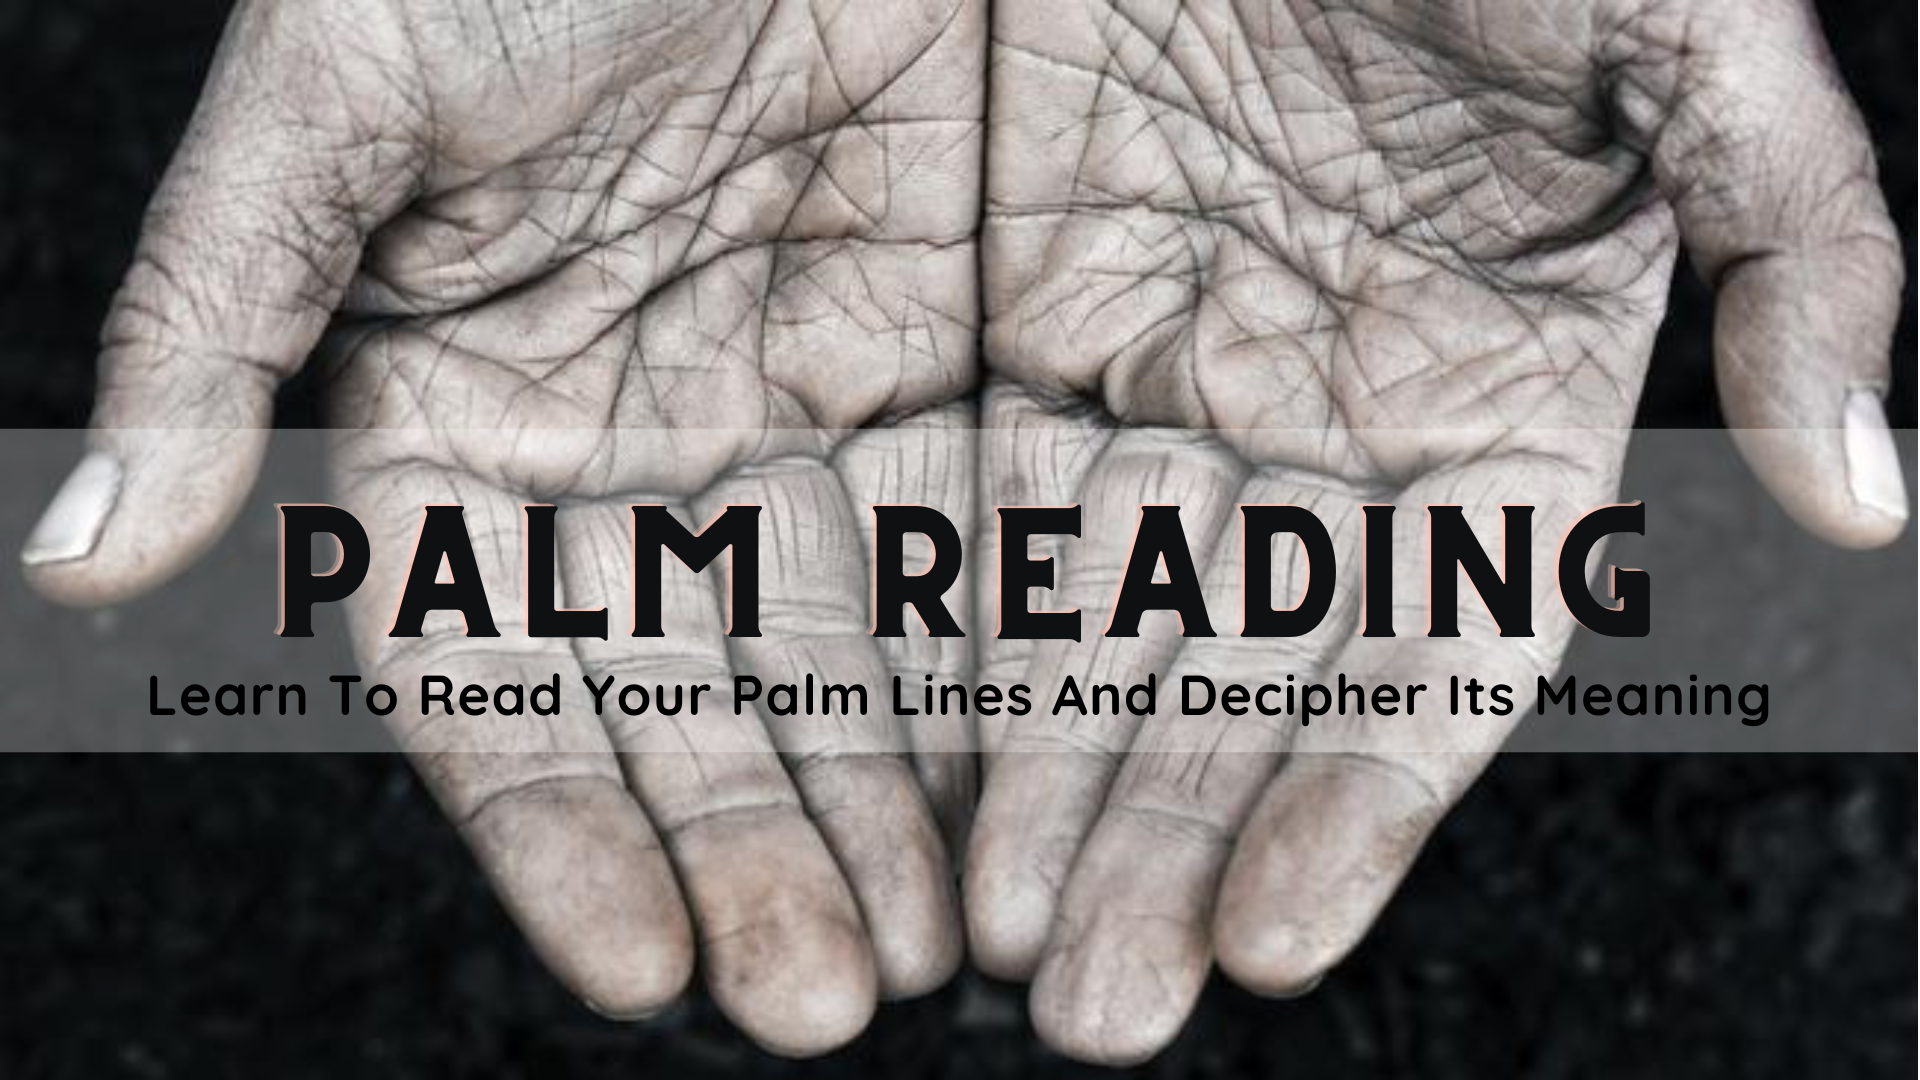 Palm Reading Interpretation - Read Your Palm Lines And Decipher Its Meaning